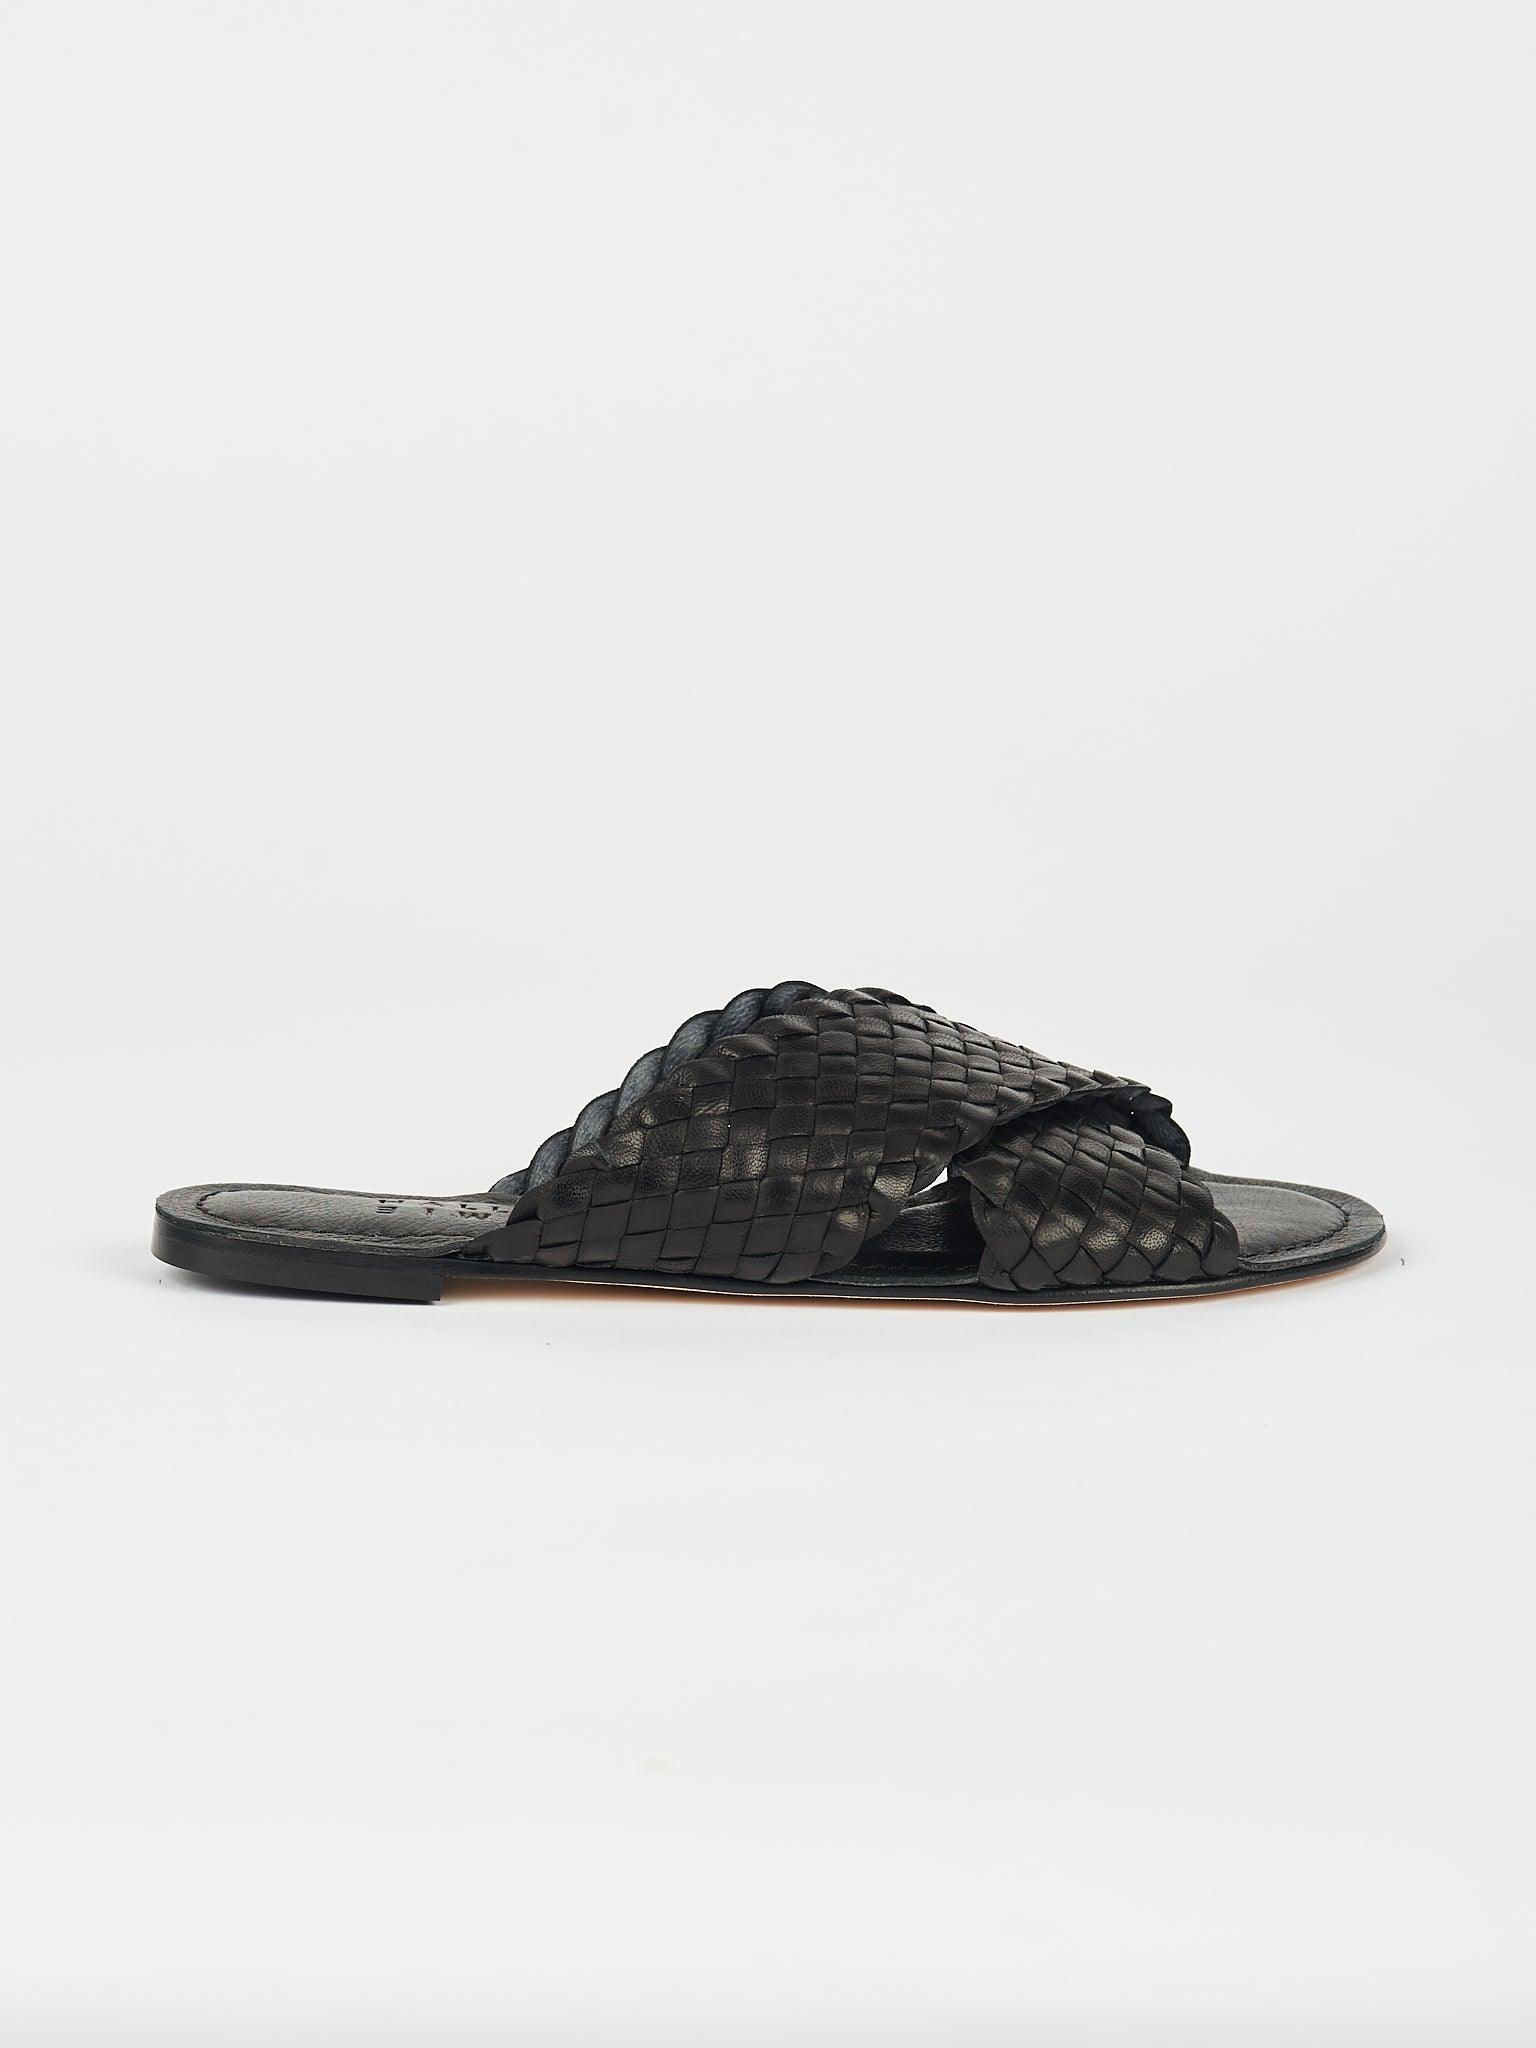 The Woven Strap Slide in Black Side View